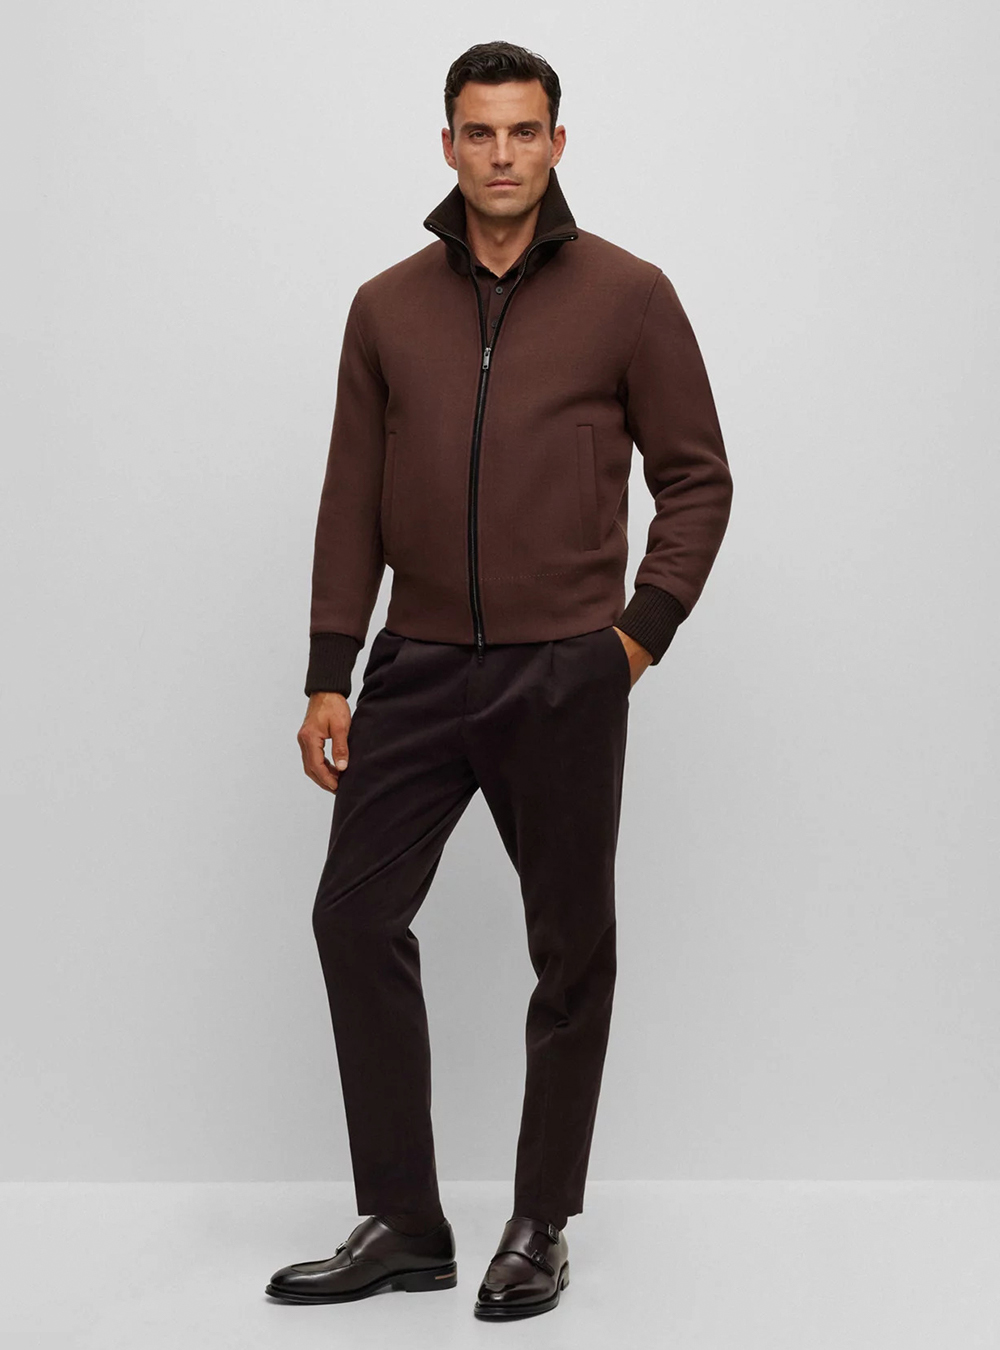 brown jacket, polo t-shirt, pants. and monk straps